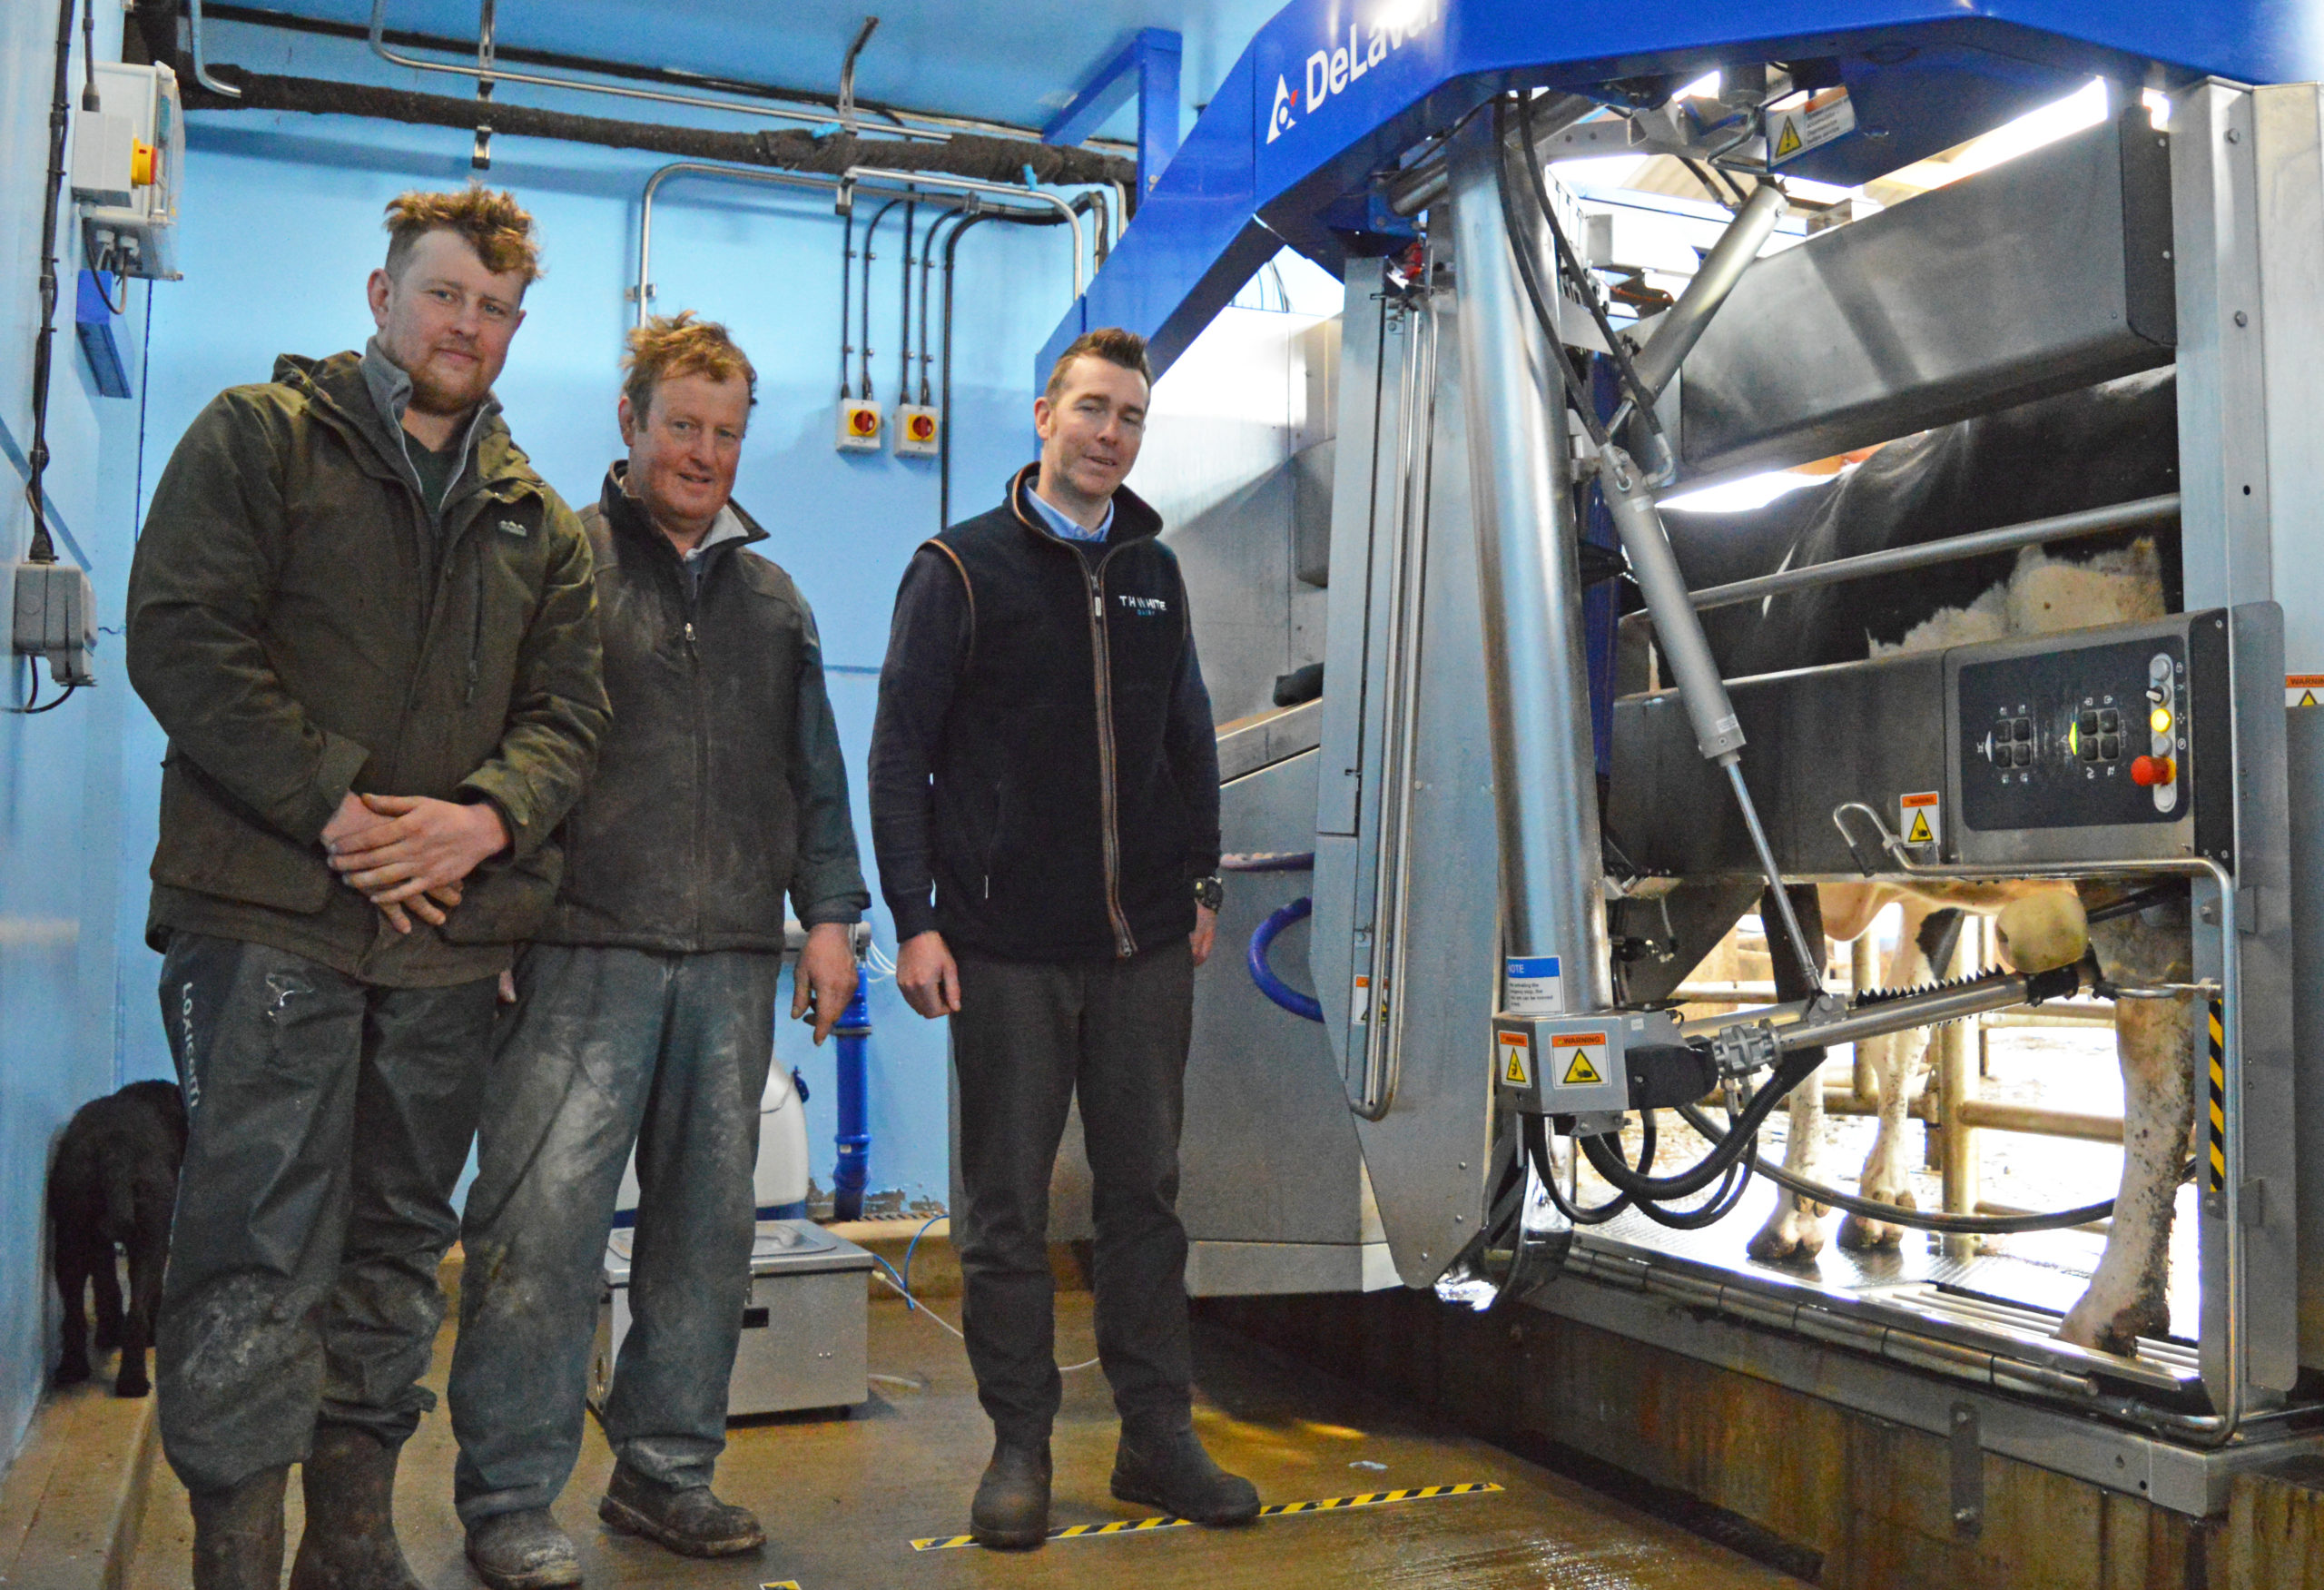 DeLaval’s VMS milking system is the right choice for the Barkers